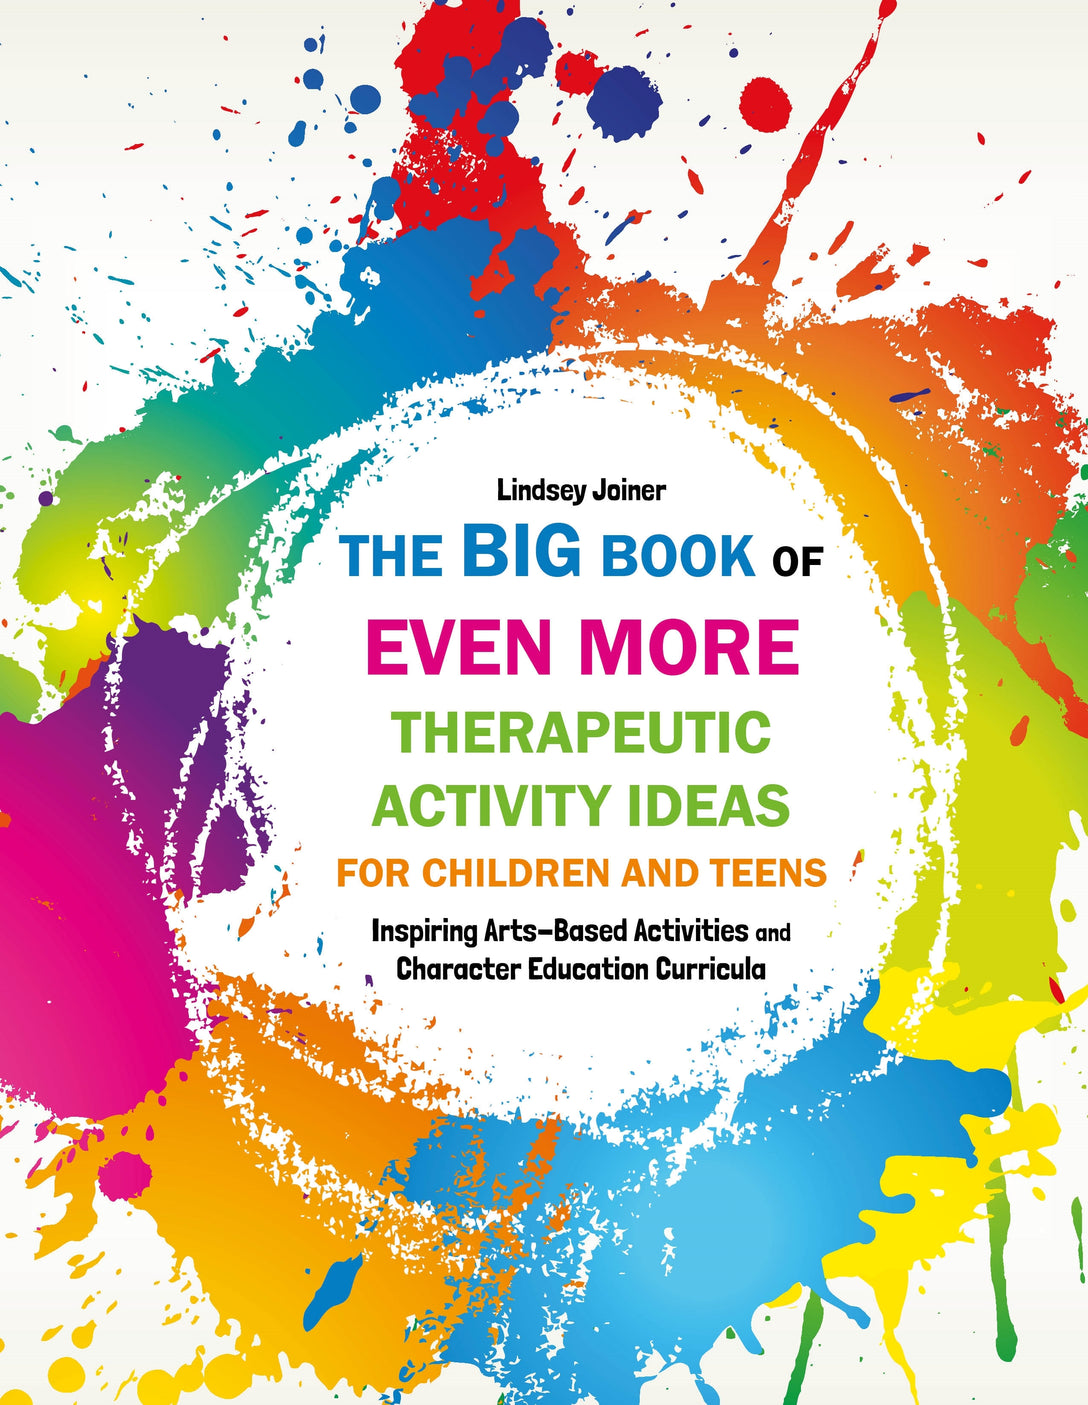 The Big Book of EVEN MORE Therapeutic Activity Ideas for Children and Teens by Lindsey Joiner